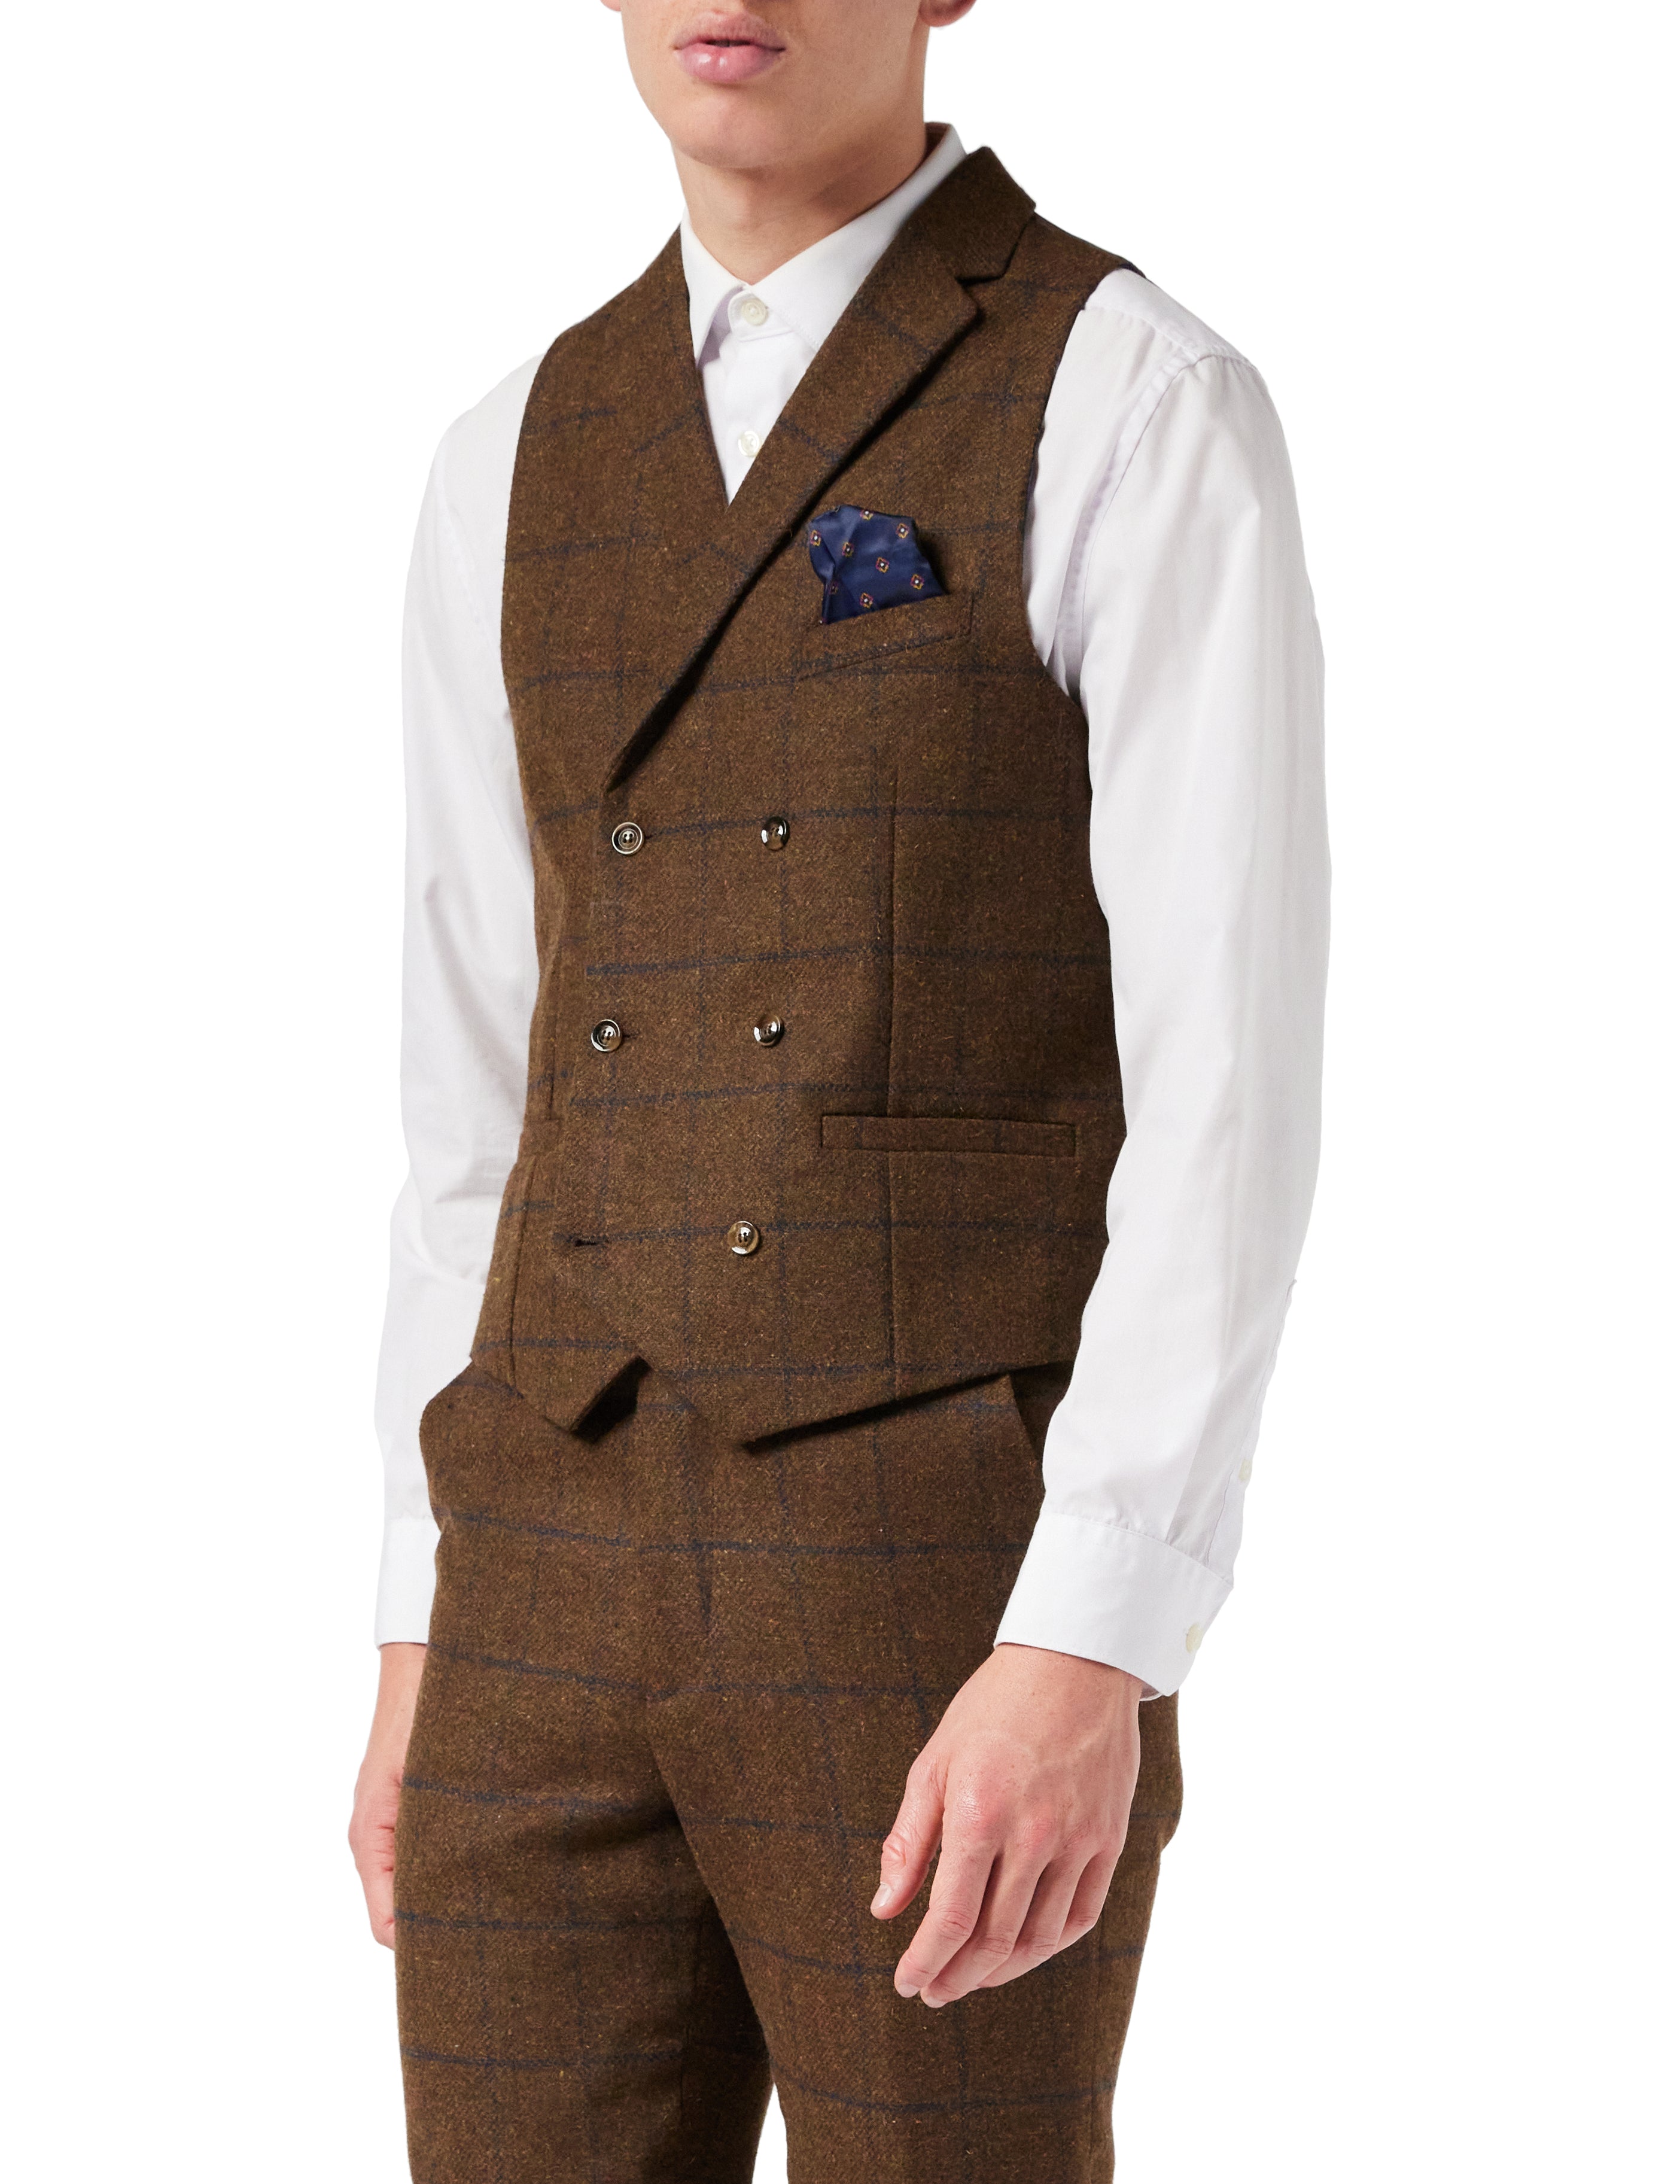 What Are The Different Kinds Of Waistcoats? | XPOSED London